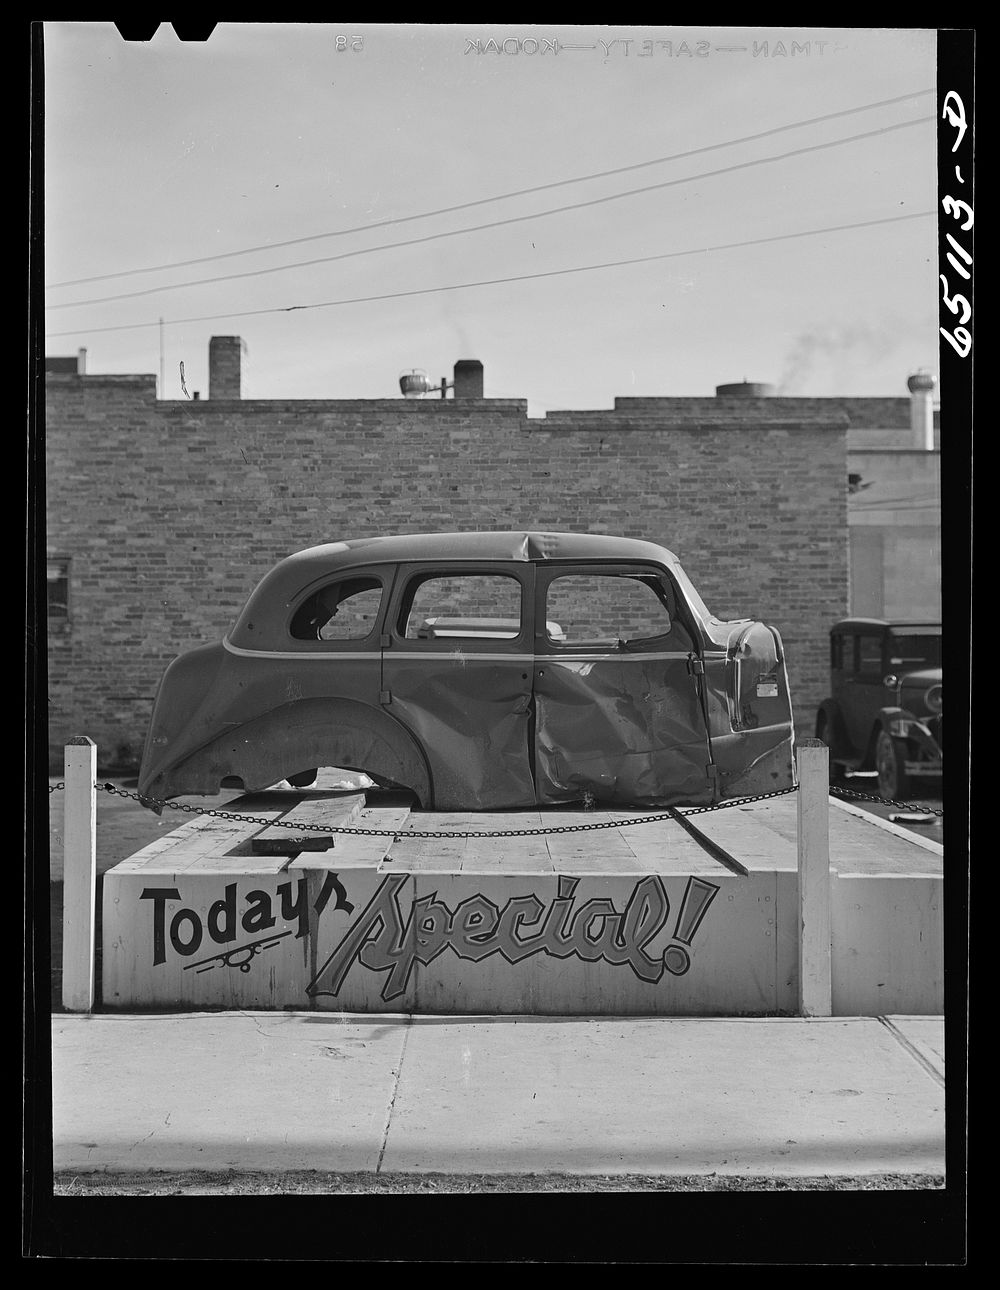 Dillon, Montana. Used car lot. Sourced from the Library of Congress.